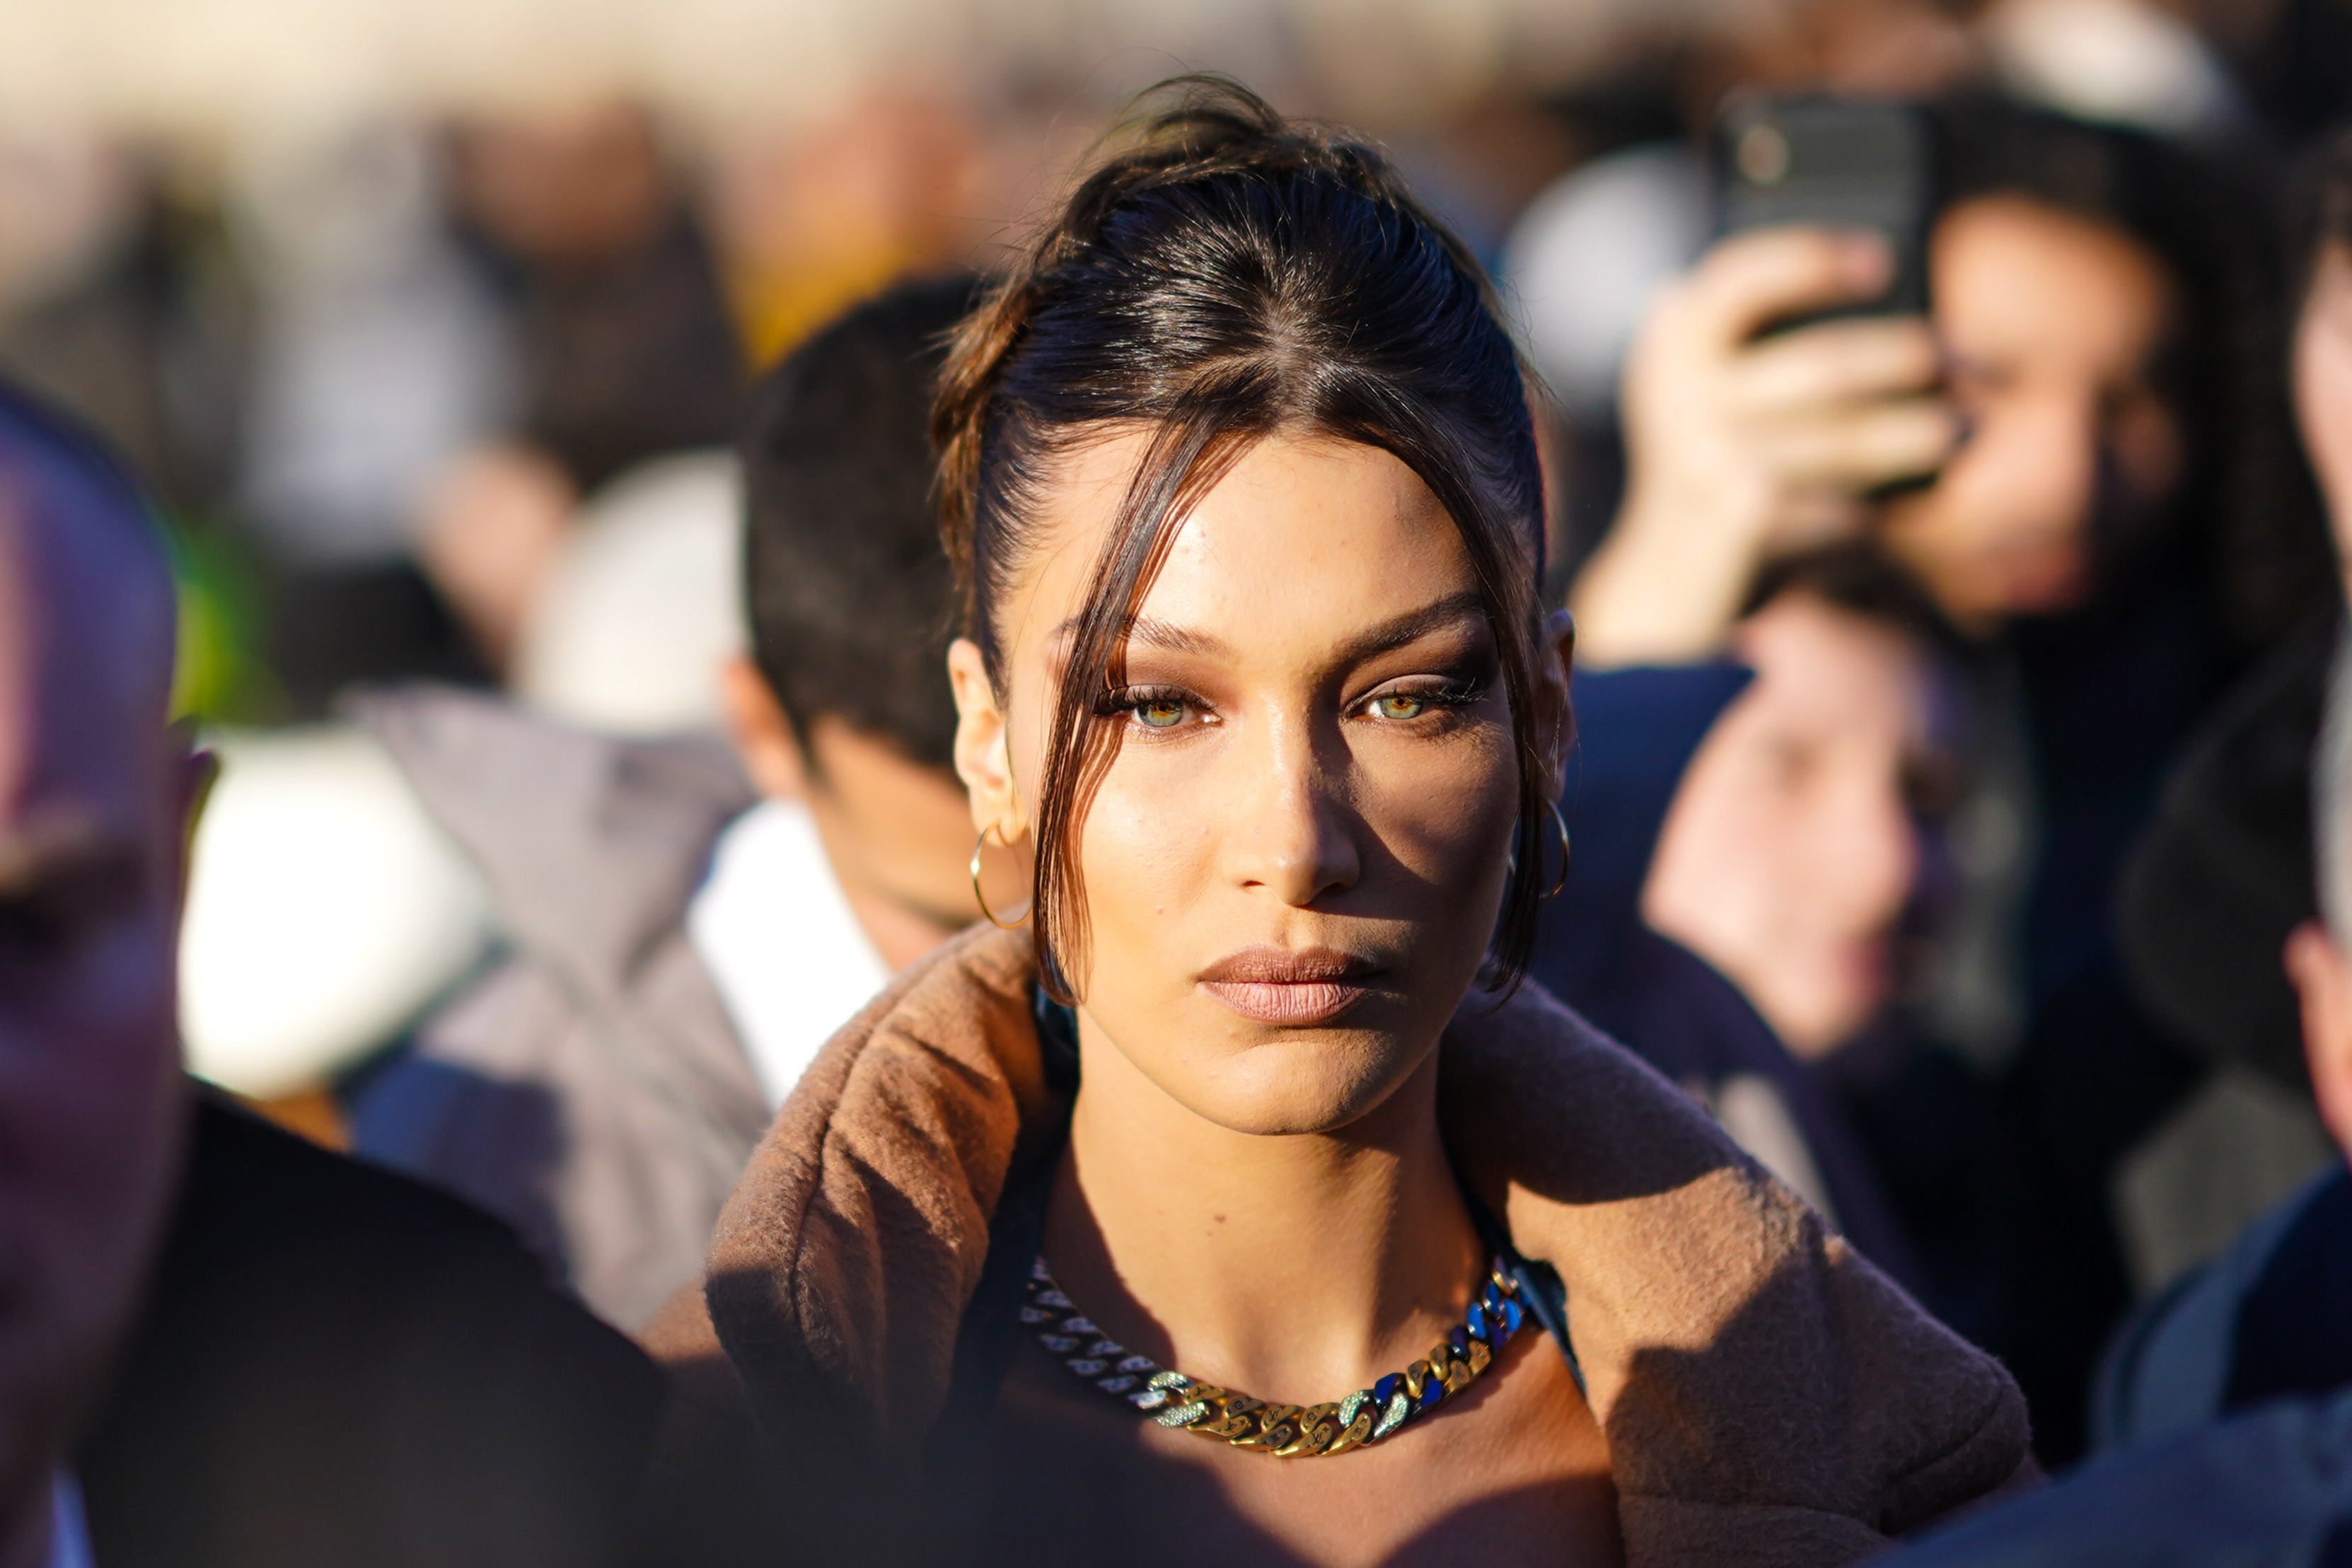 Bella Hadid as seen outside Vuitton during Paris Fashion Week on January 16, 2020 in Paris, France | Source: Getty Images